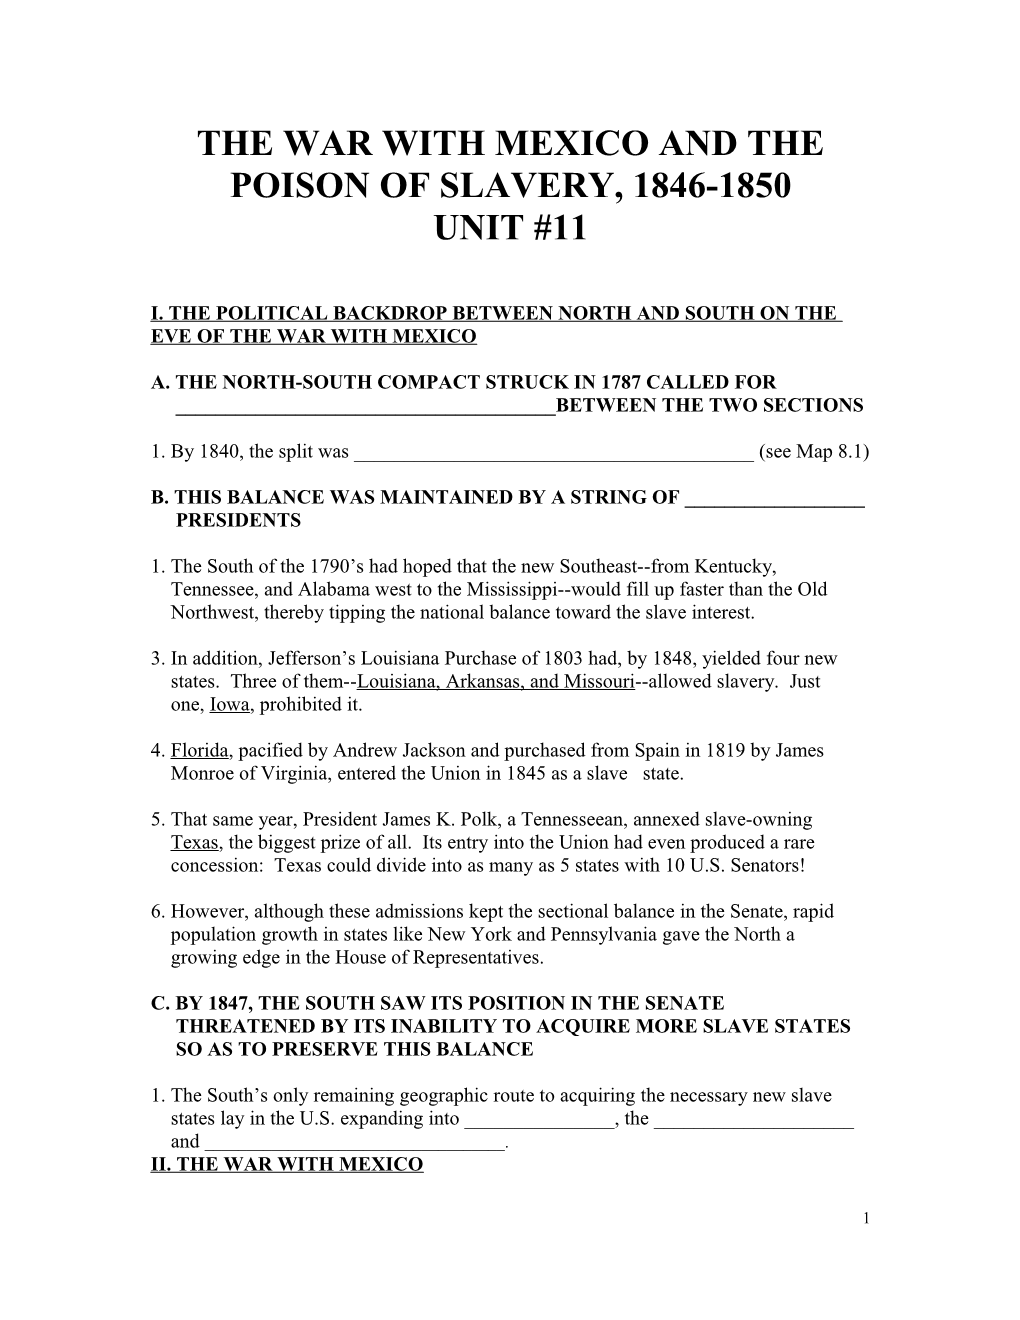 The War with Mexico and the Poison of Slavery, 1846-1850